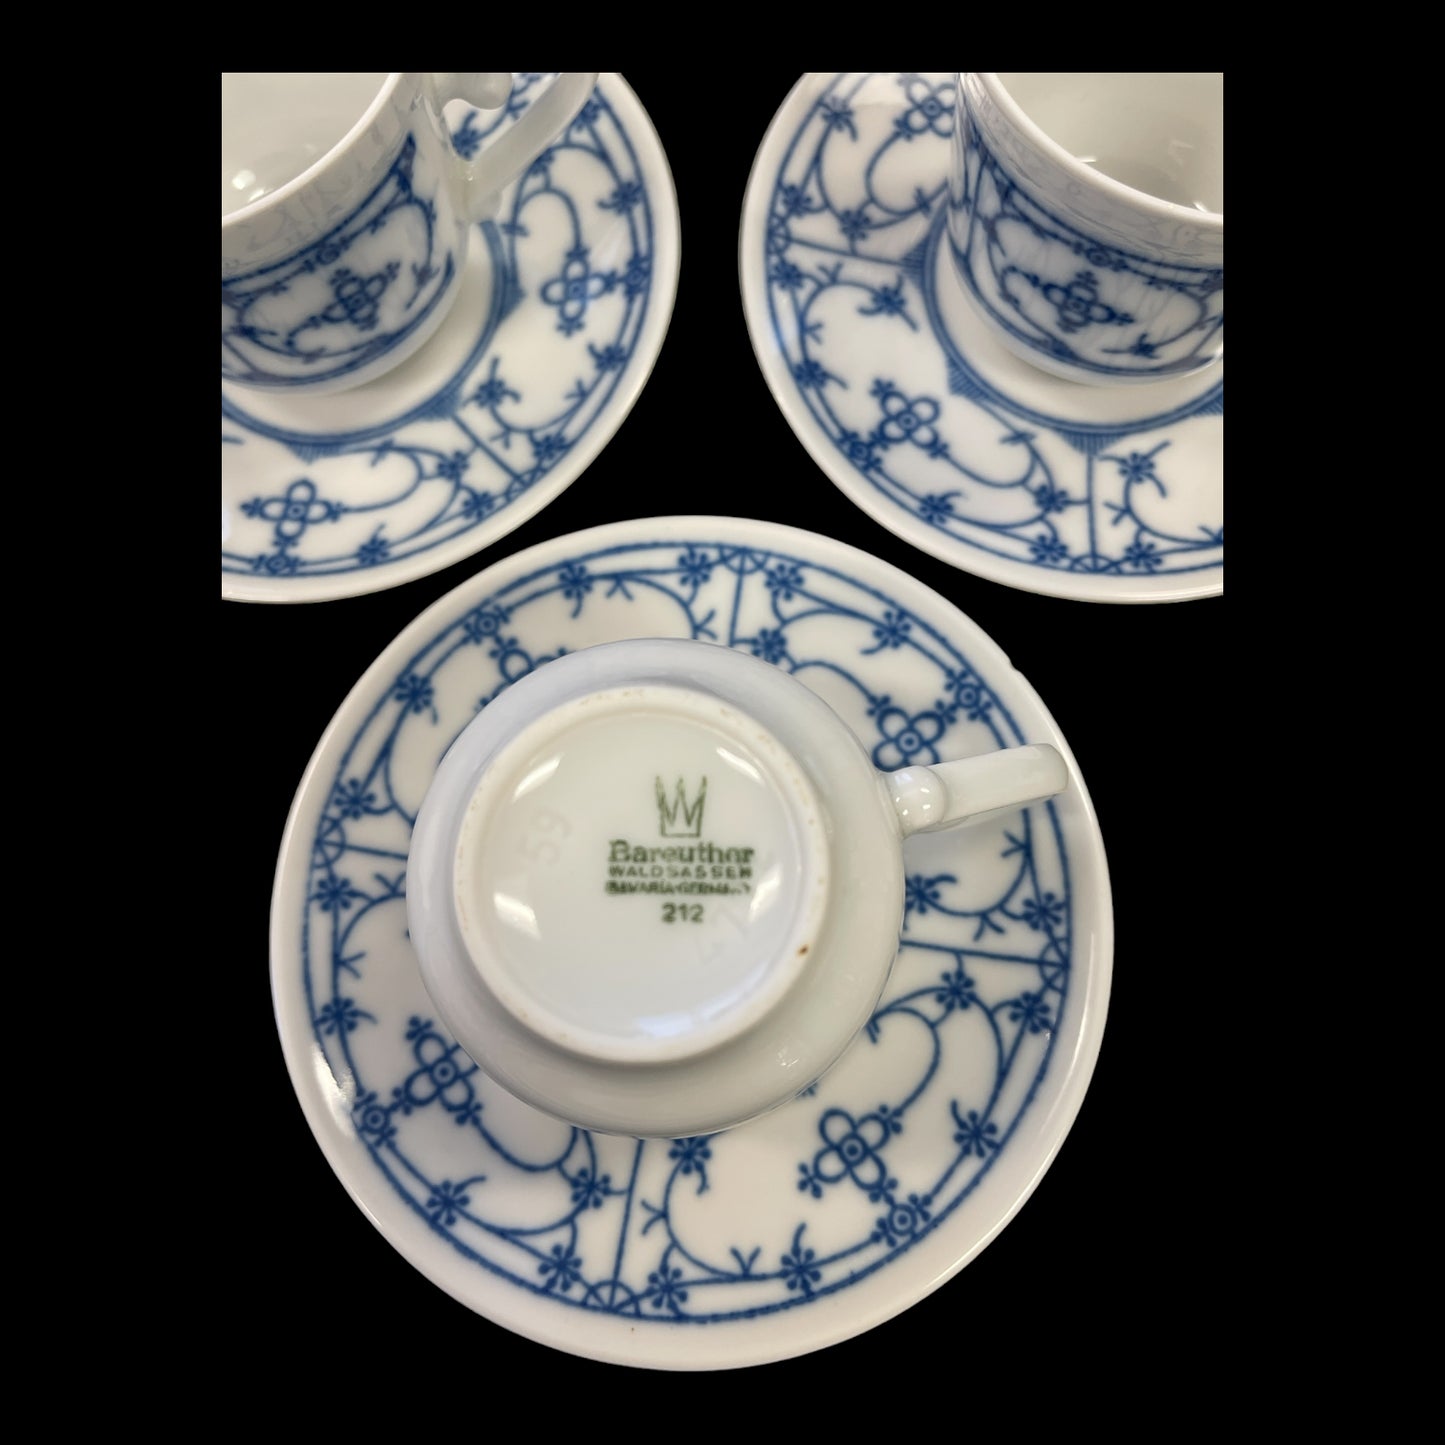 15 Piece Bareuther Waldsassen Blue and White Tea Service Set of 6 with Cream and Sugar